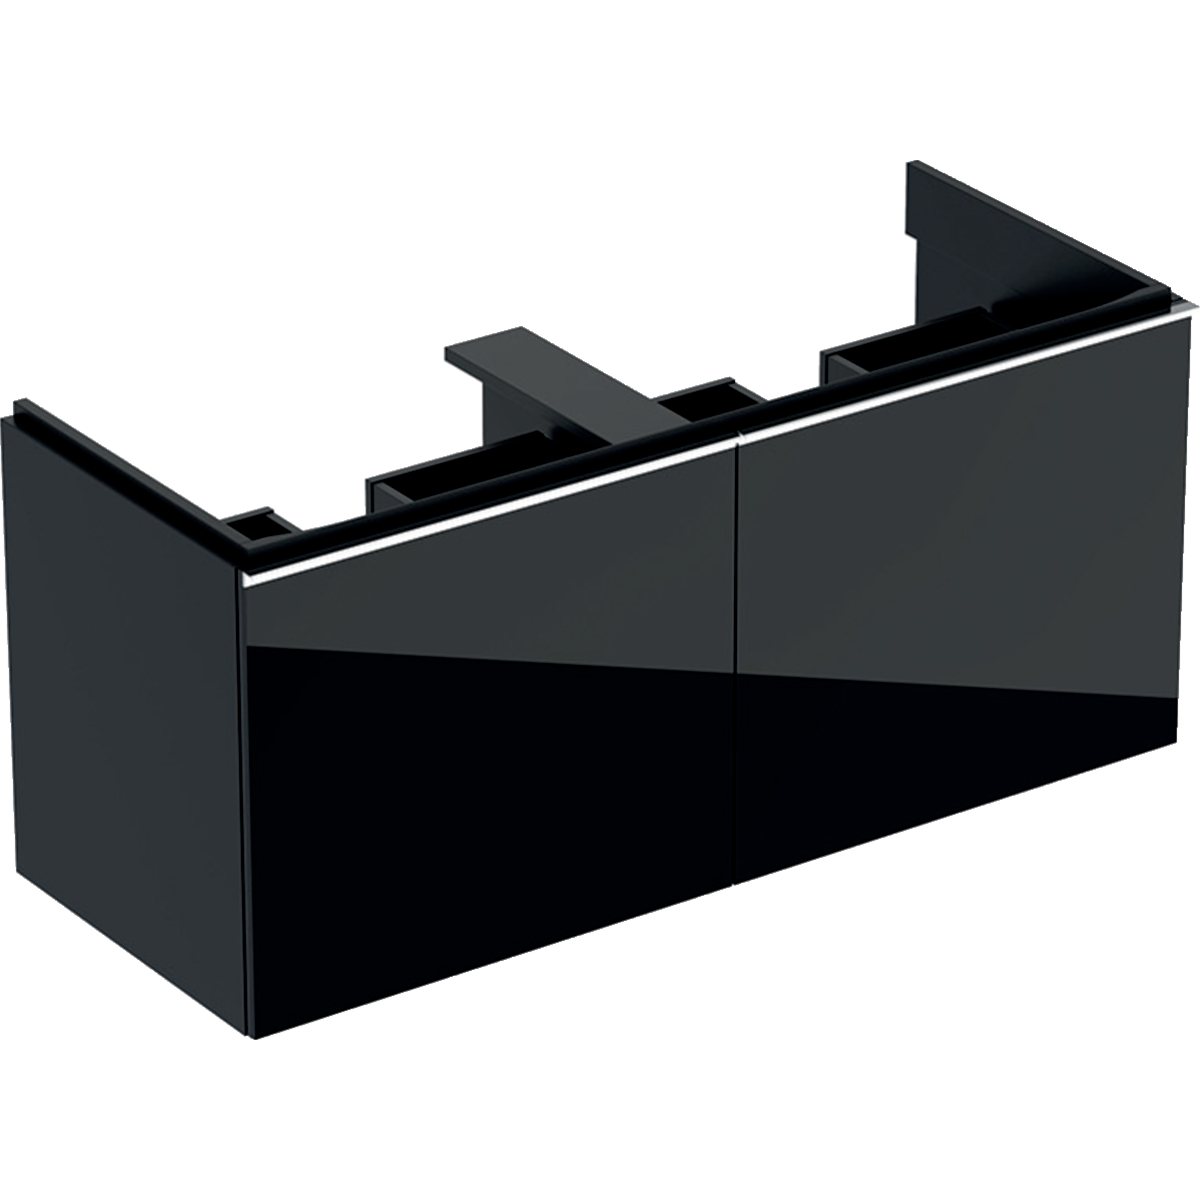 Geberit 500613161 Acanto 1190mm Vanity Unit for Double Basin with Drawers - Matt Black (BASIN NOT INCLUDED)